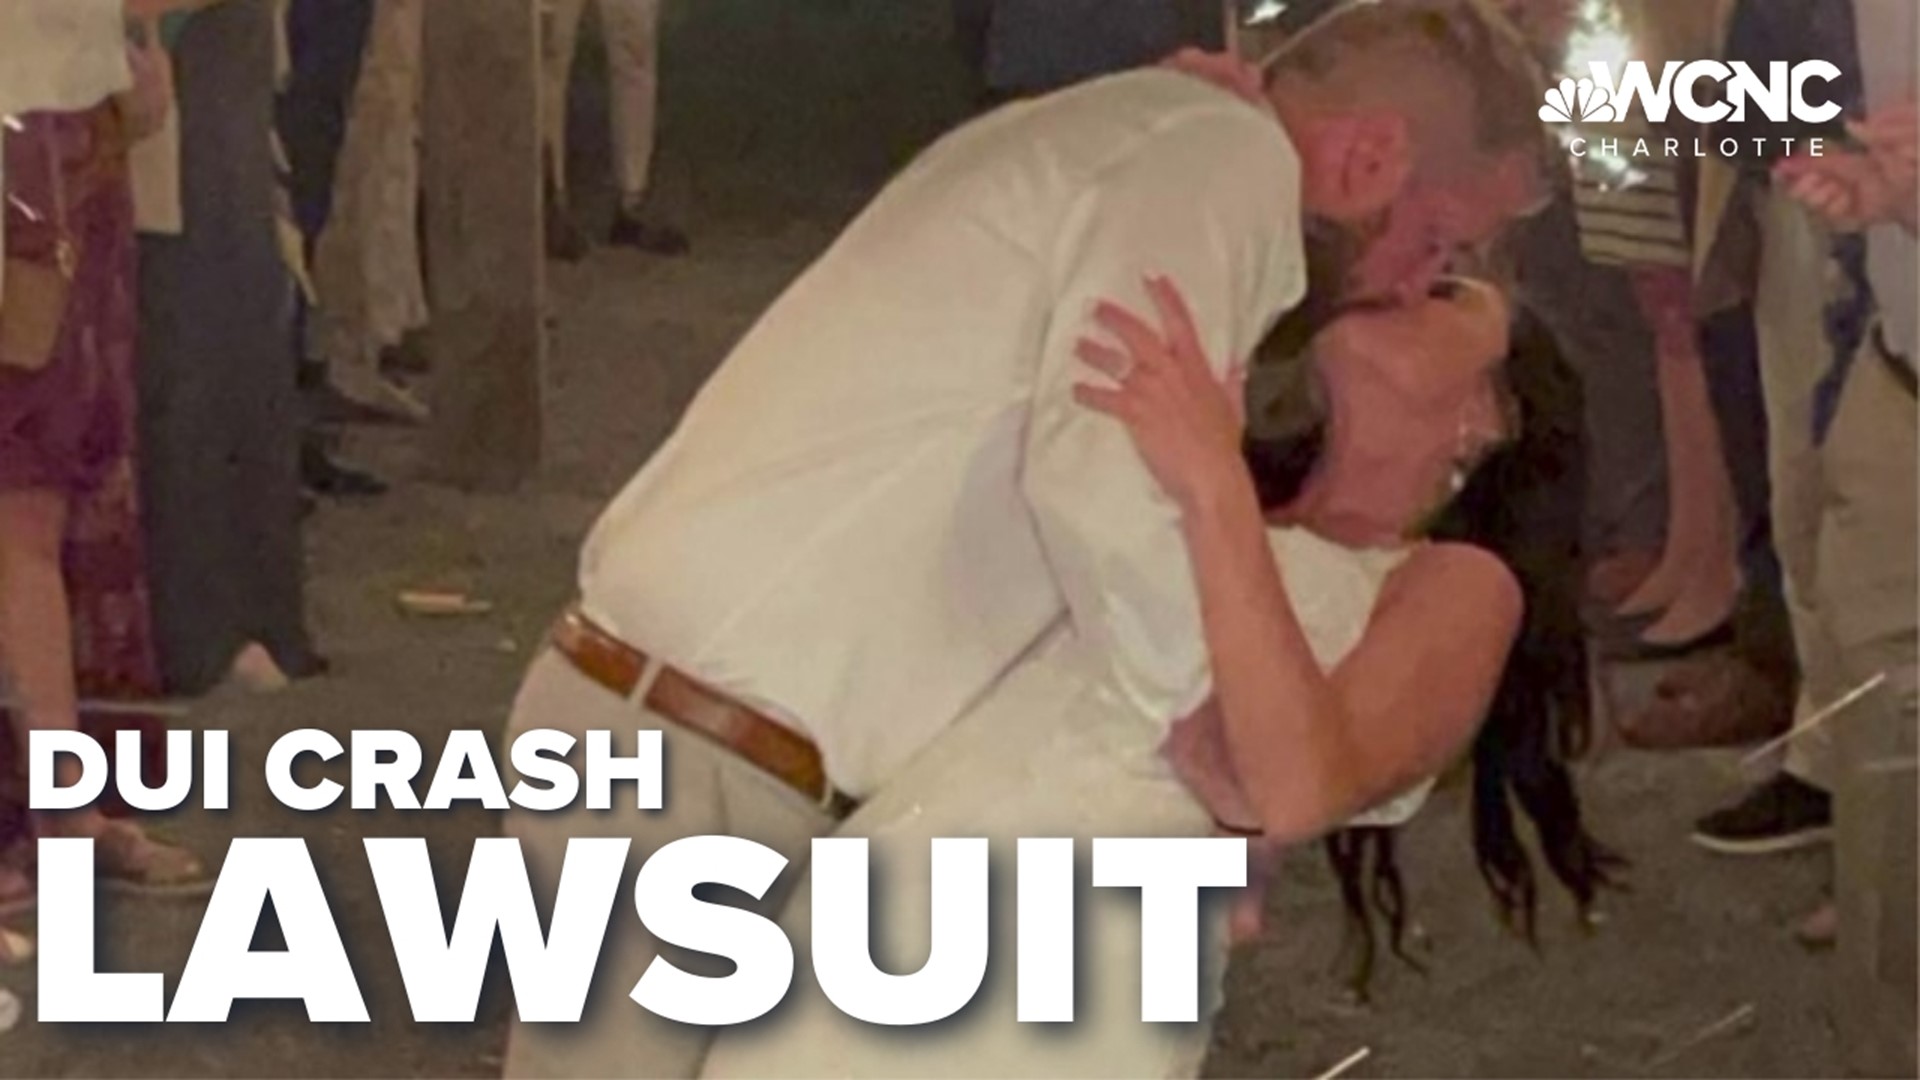 The groom who lost his wife in a drunk driving crash, just hours after their wedding, has now filed a wrongful death lawsuit.